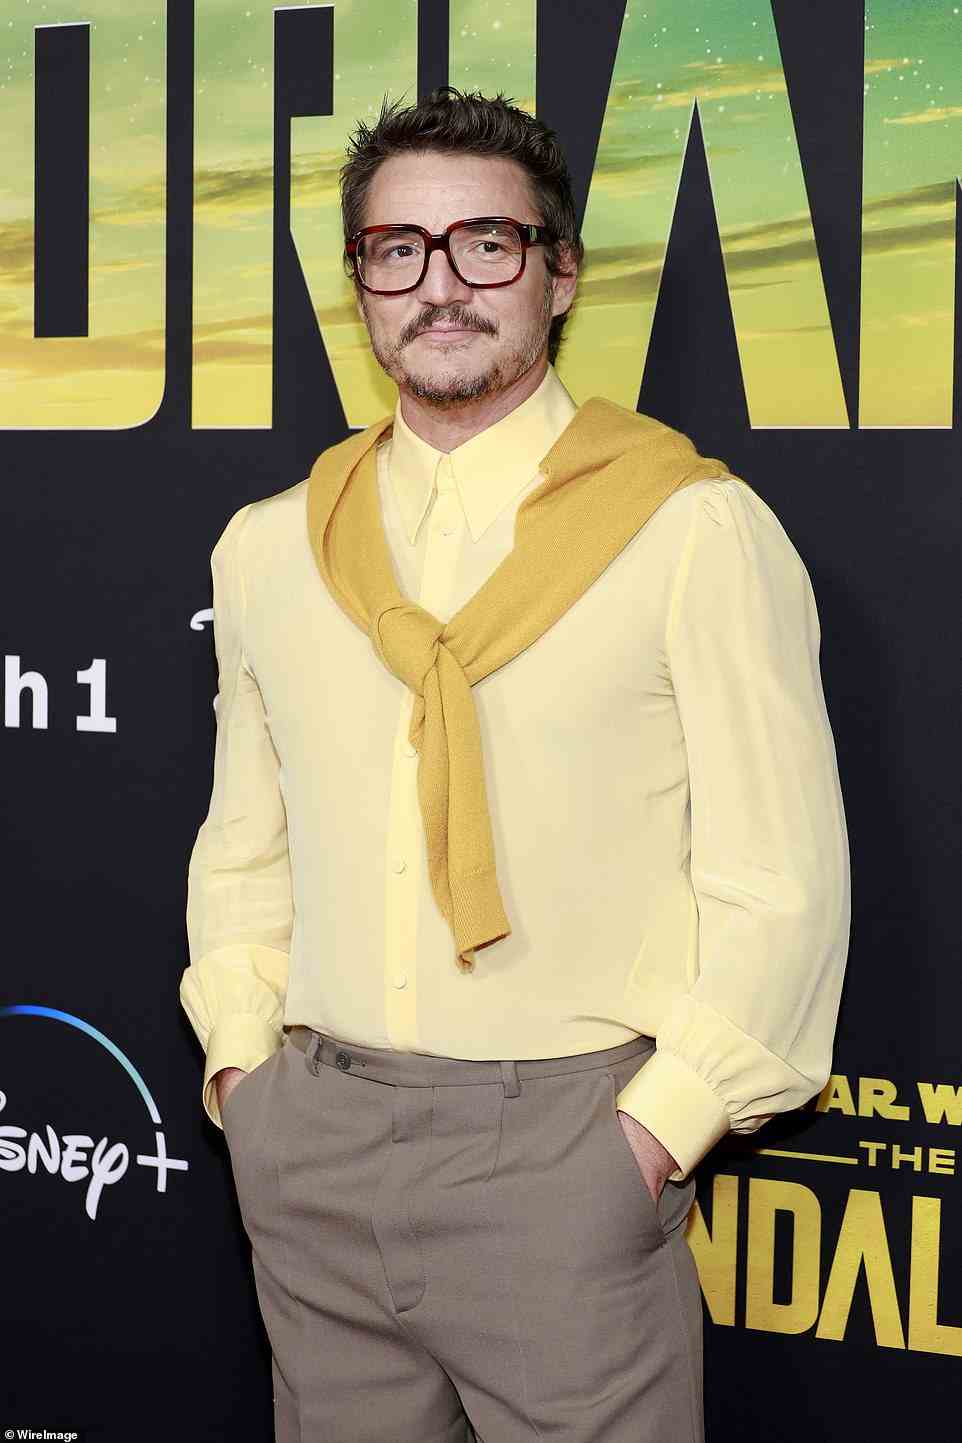 Preppy: Pascal cut a preppy figure as he tied a mustard cardigan around the shoulders of his pastel yellow button-up shirt